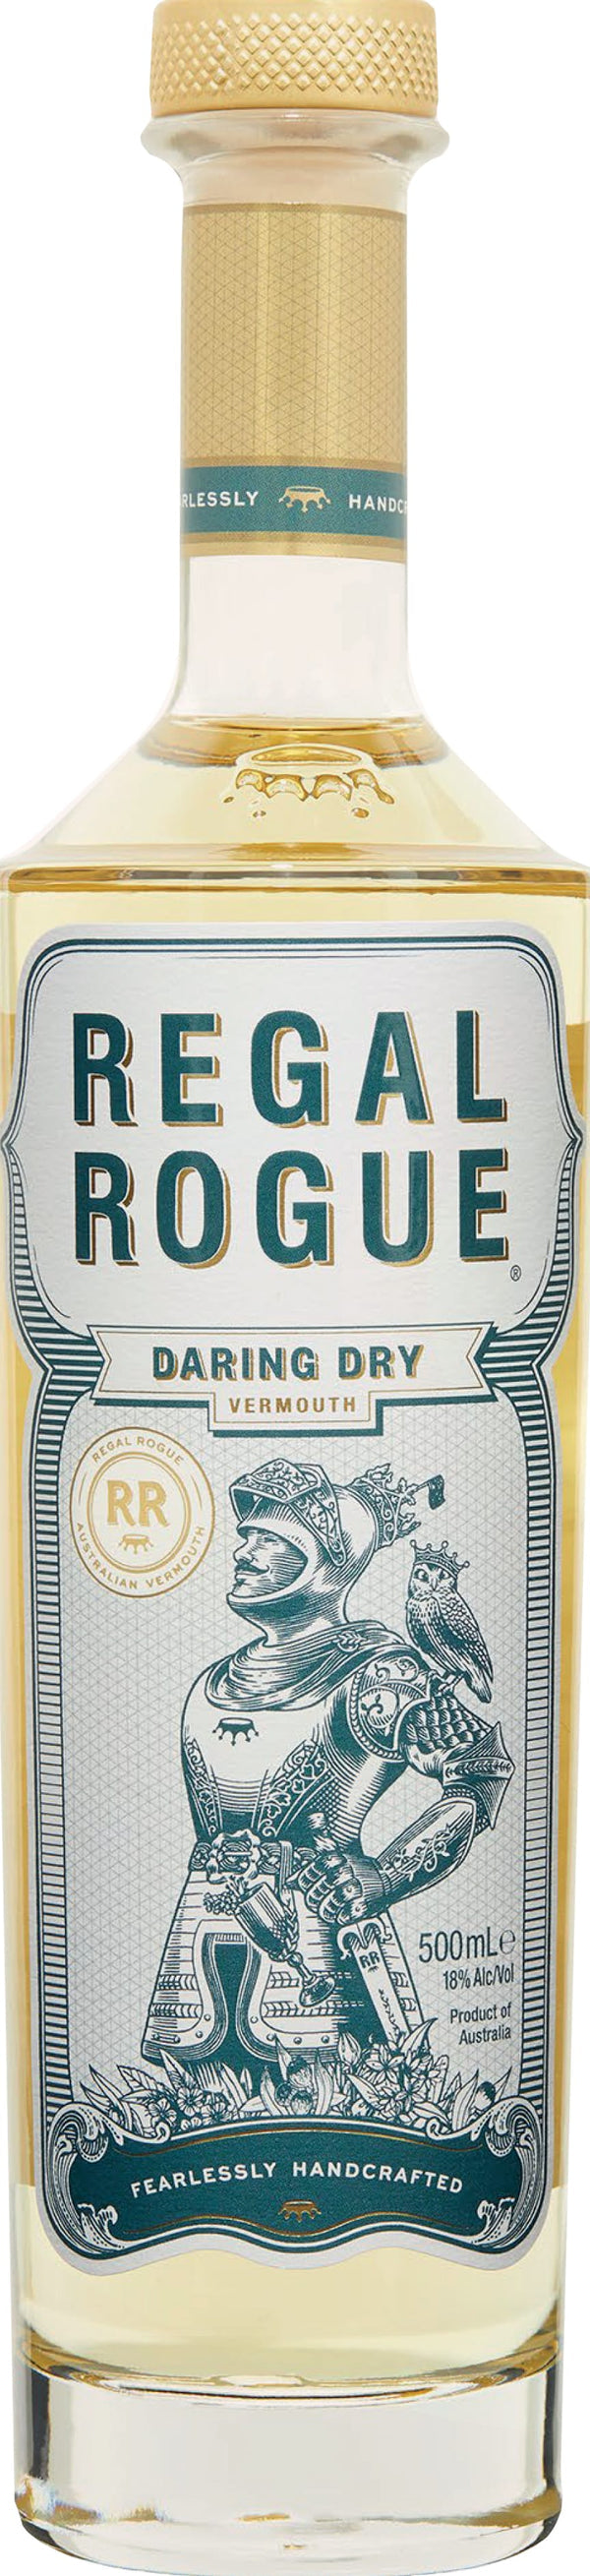 Regal Rogue Daring Dry Vermouth 50cl NV6x75cl - Just Wines 